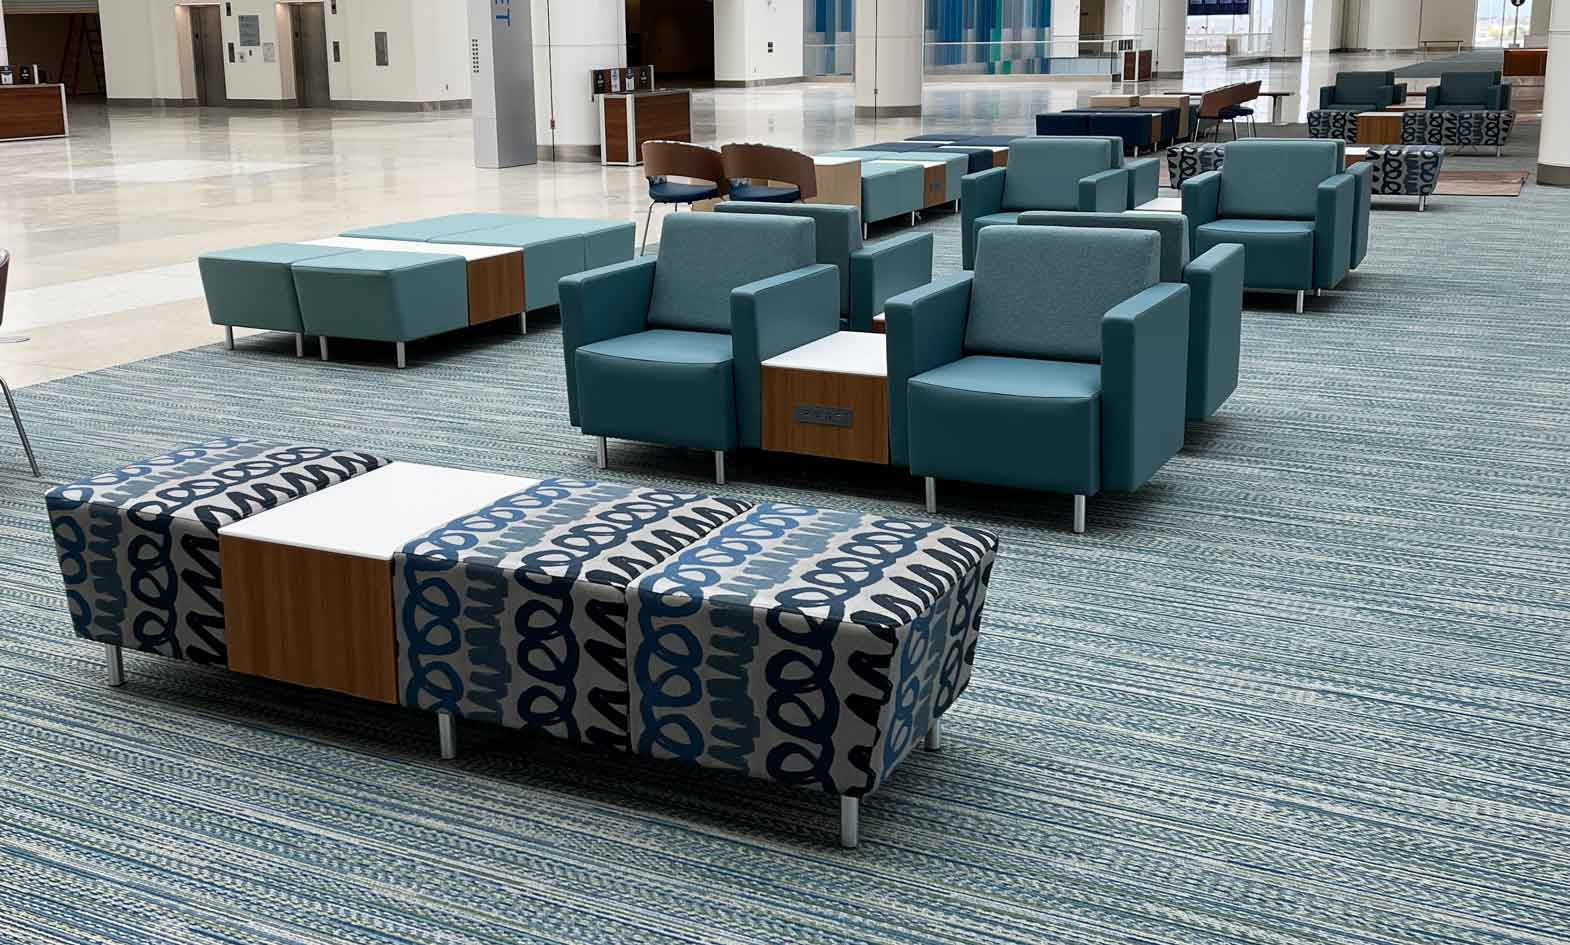 Airport seating with lounge chairs, benches and powered occasional tables